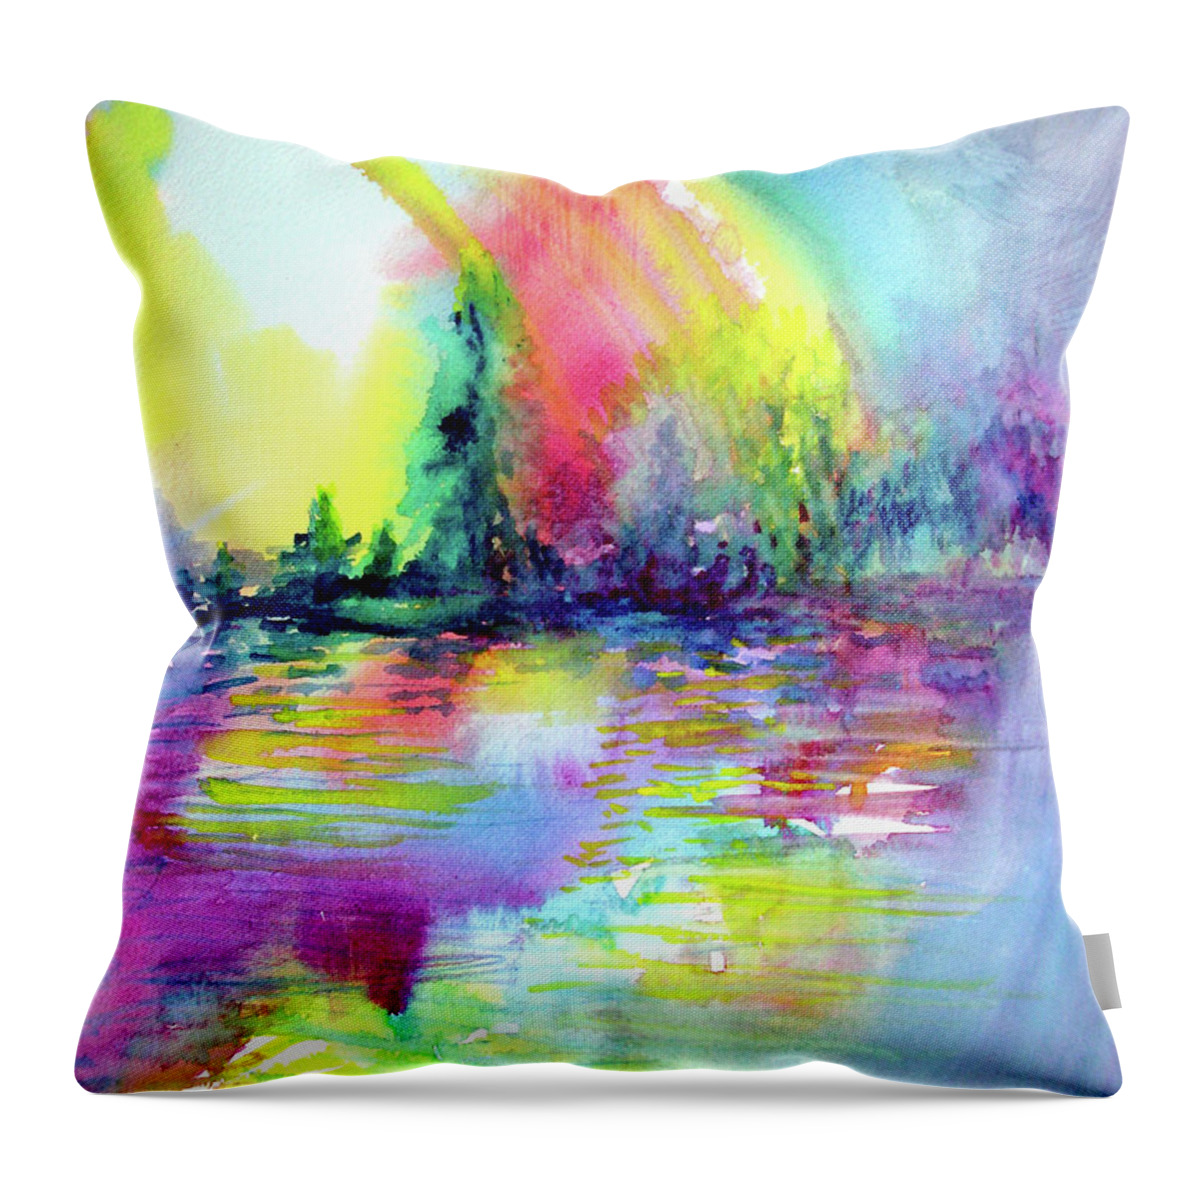 Rainbow Throw Pillow featuring the painting Over the Rainbow by Allison Ashton